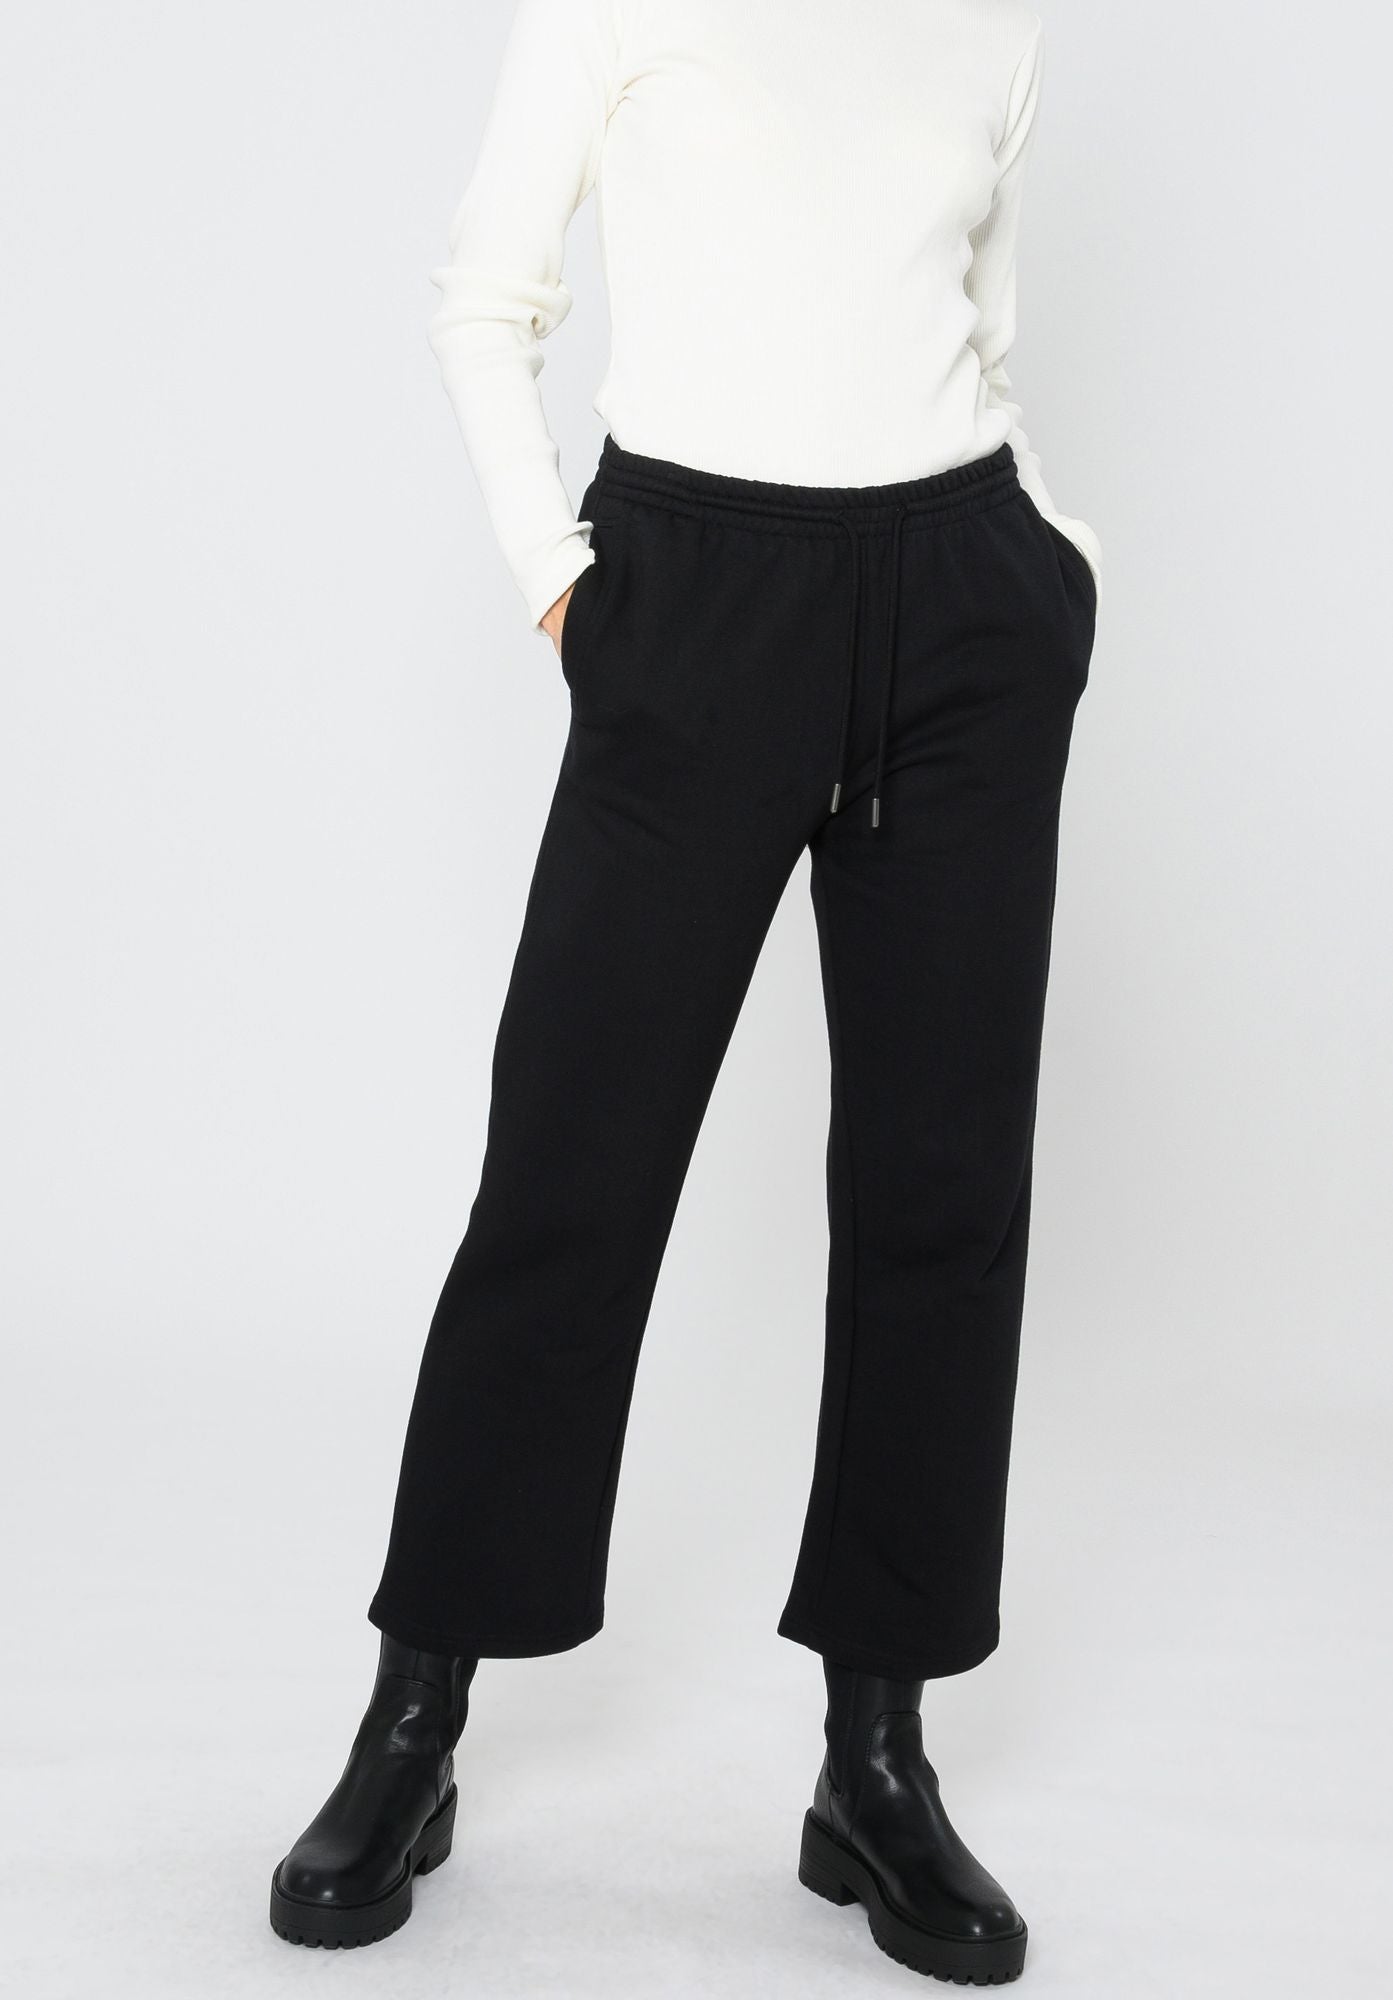 Jogging pants in black made of cotton by ThokkThokk (S)